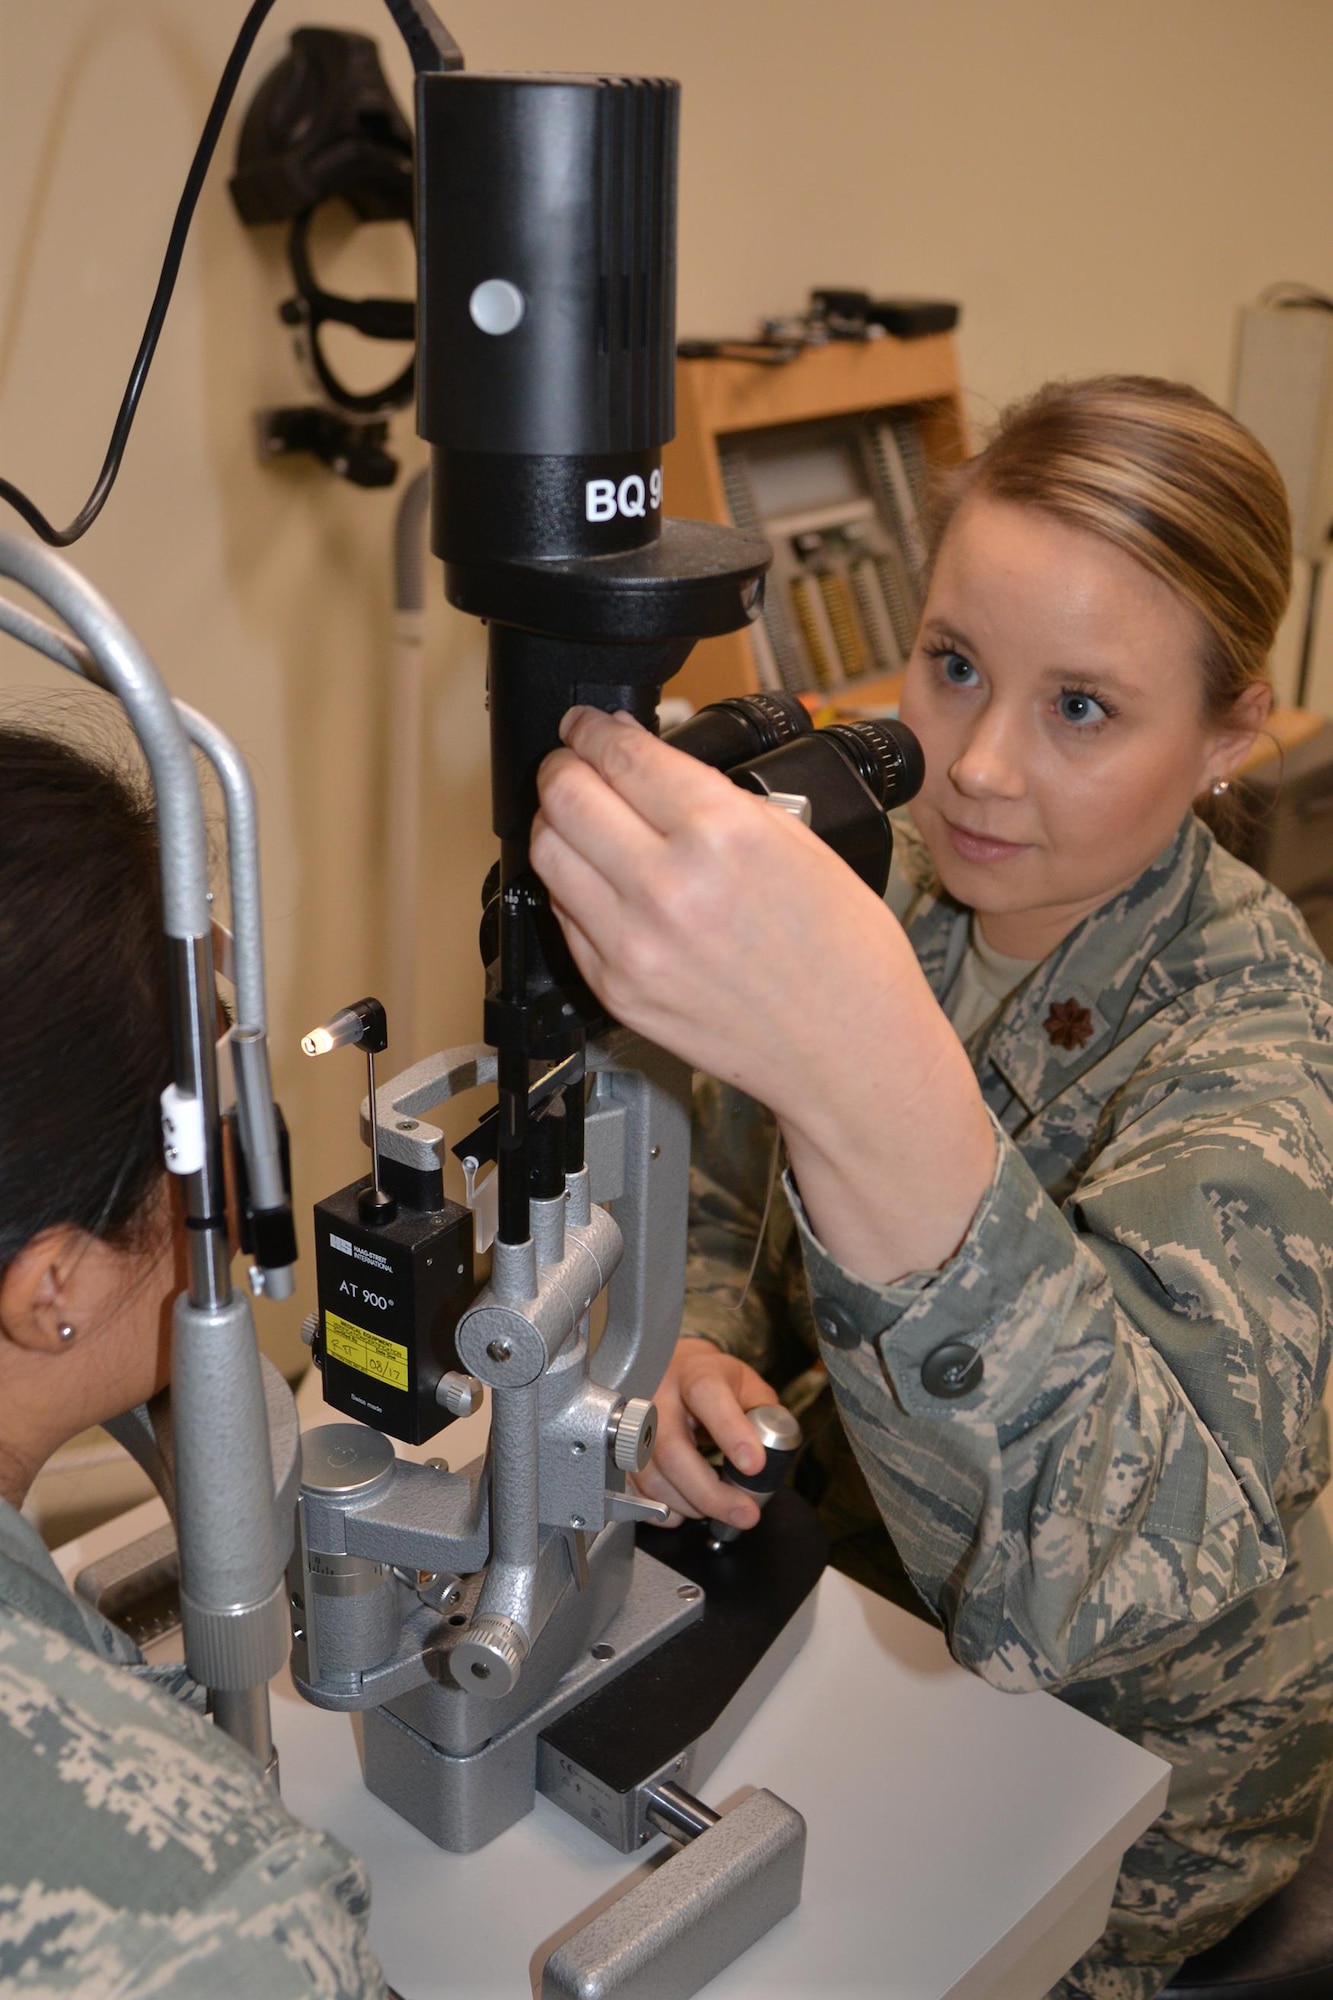 Maj. Kara Reynolds, 477th Aerospace Medicine Flight Chief of Optometry, participates in training activities with Senior Airman Andrea Jaque-Baez during the unit training assembly at Joint Base Elmendorf-Richardson, Alaska Mar. 4-5, 2017. (U.S. Air Force photo by Staff Sgt. Mike Campbell)